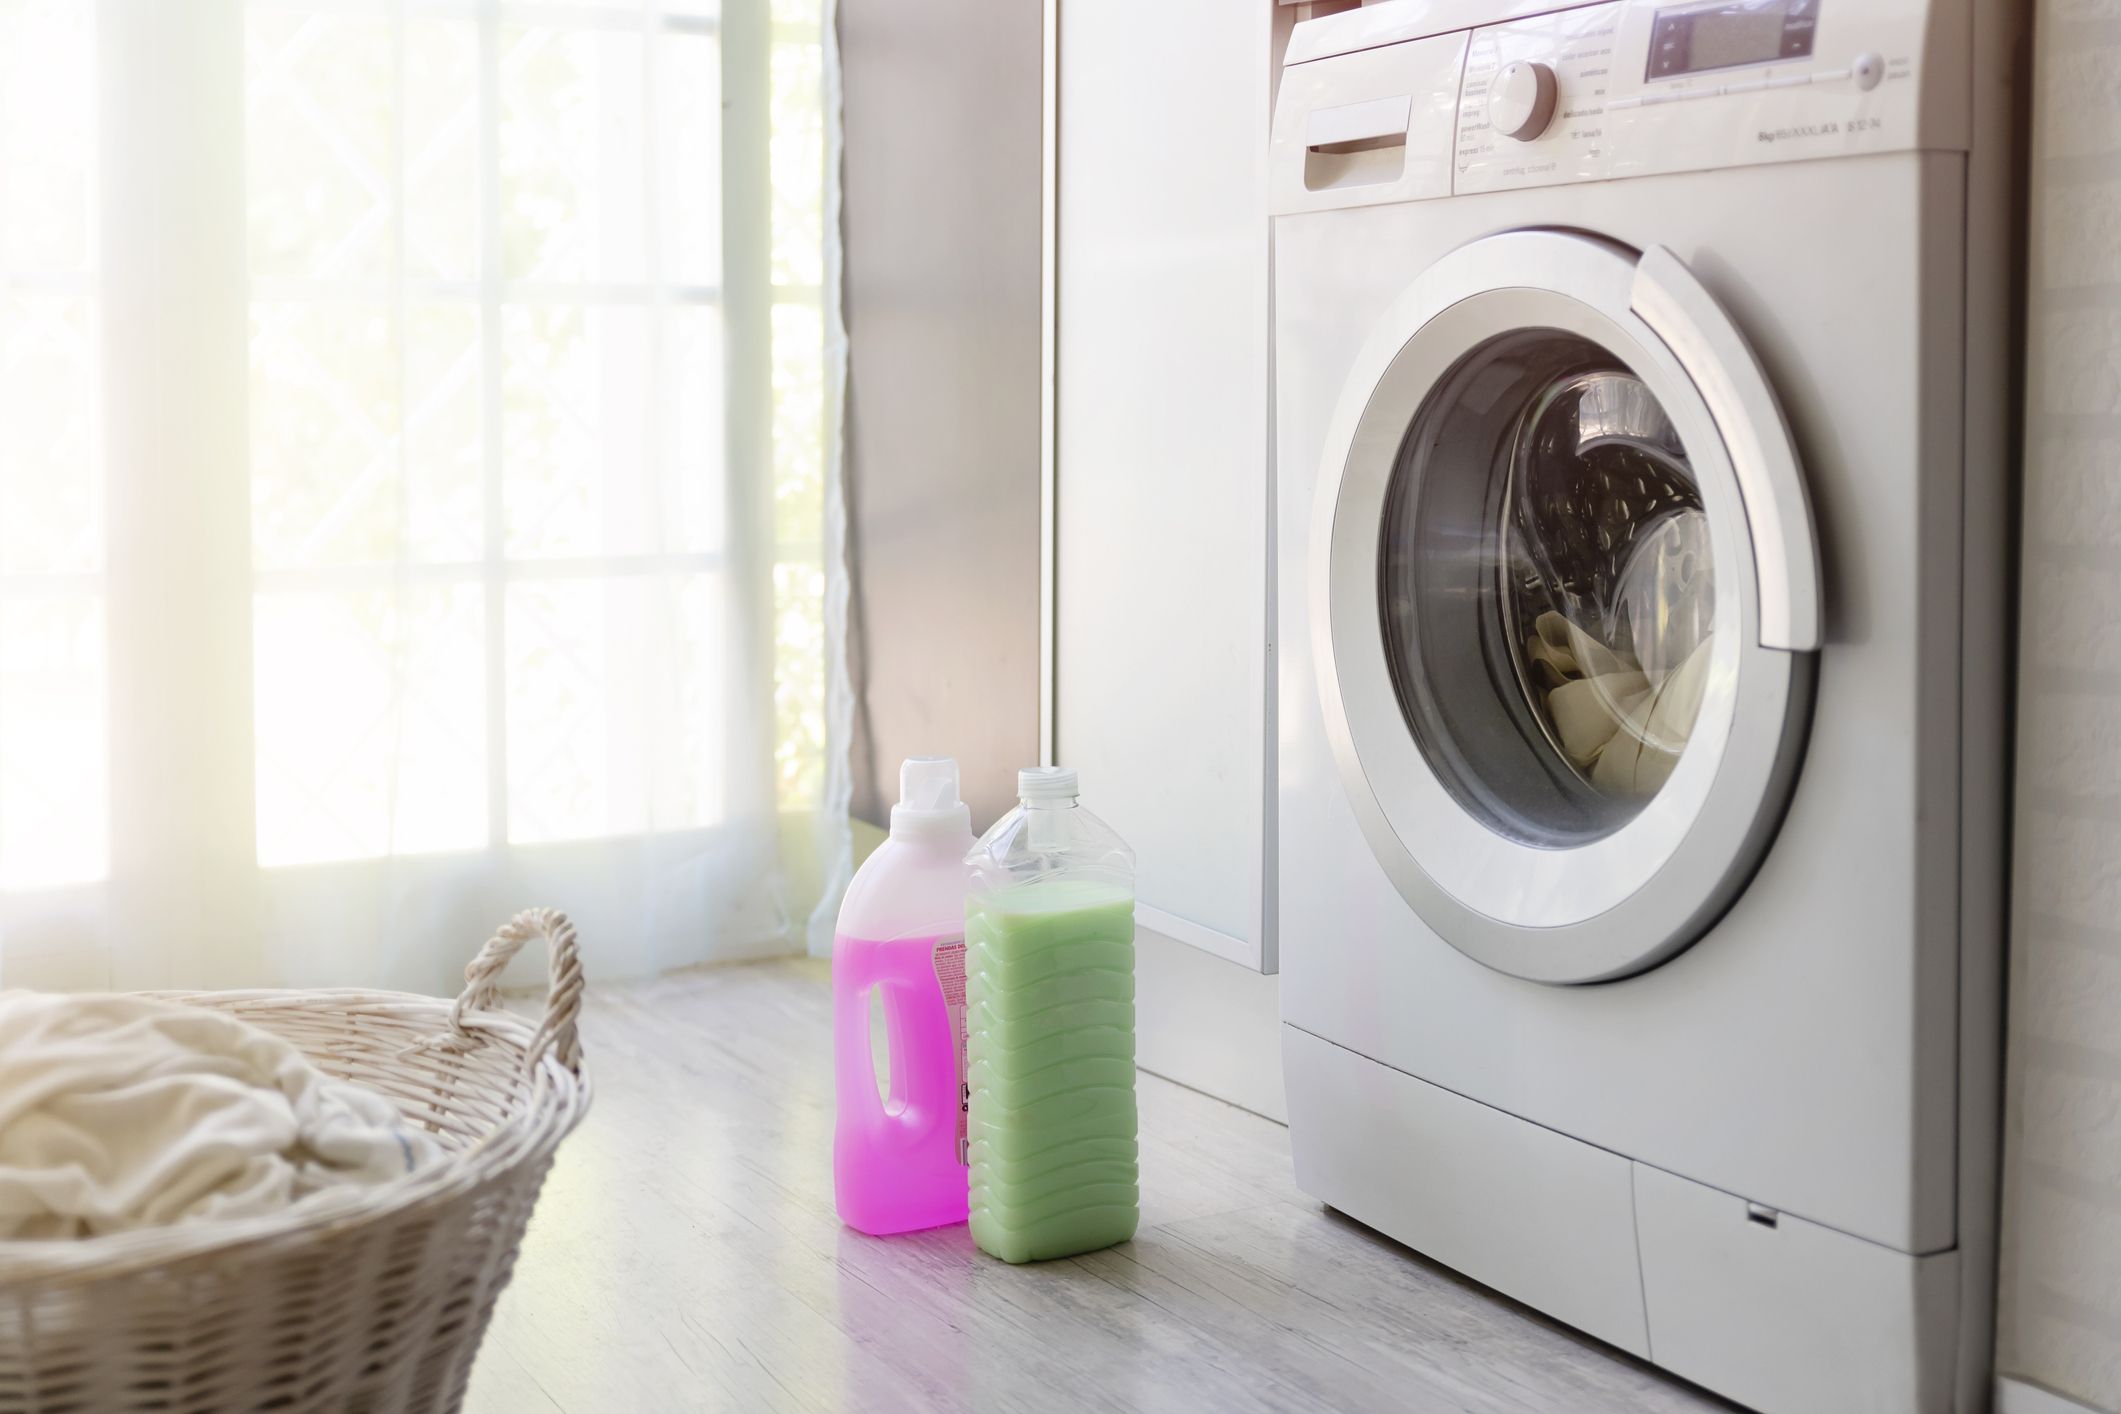 7 washing machine settings that will make your life easier